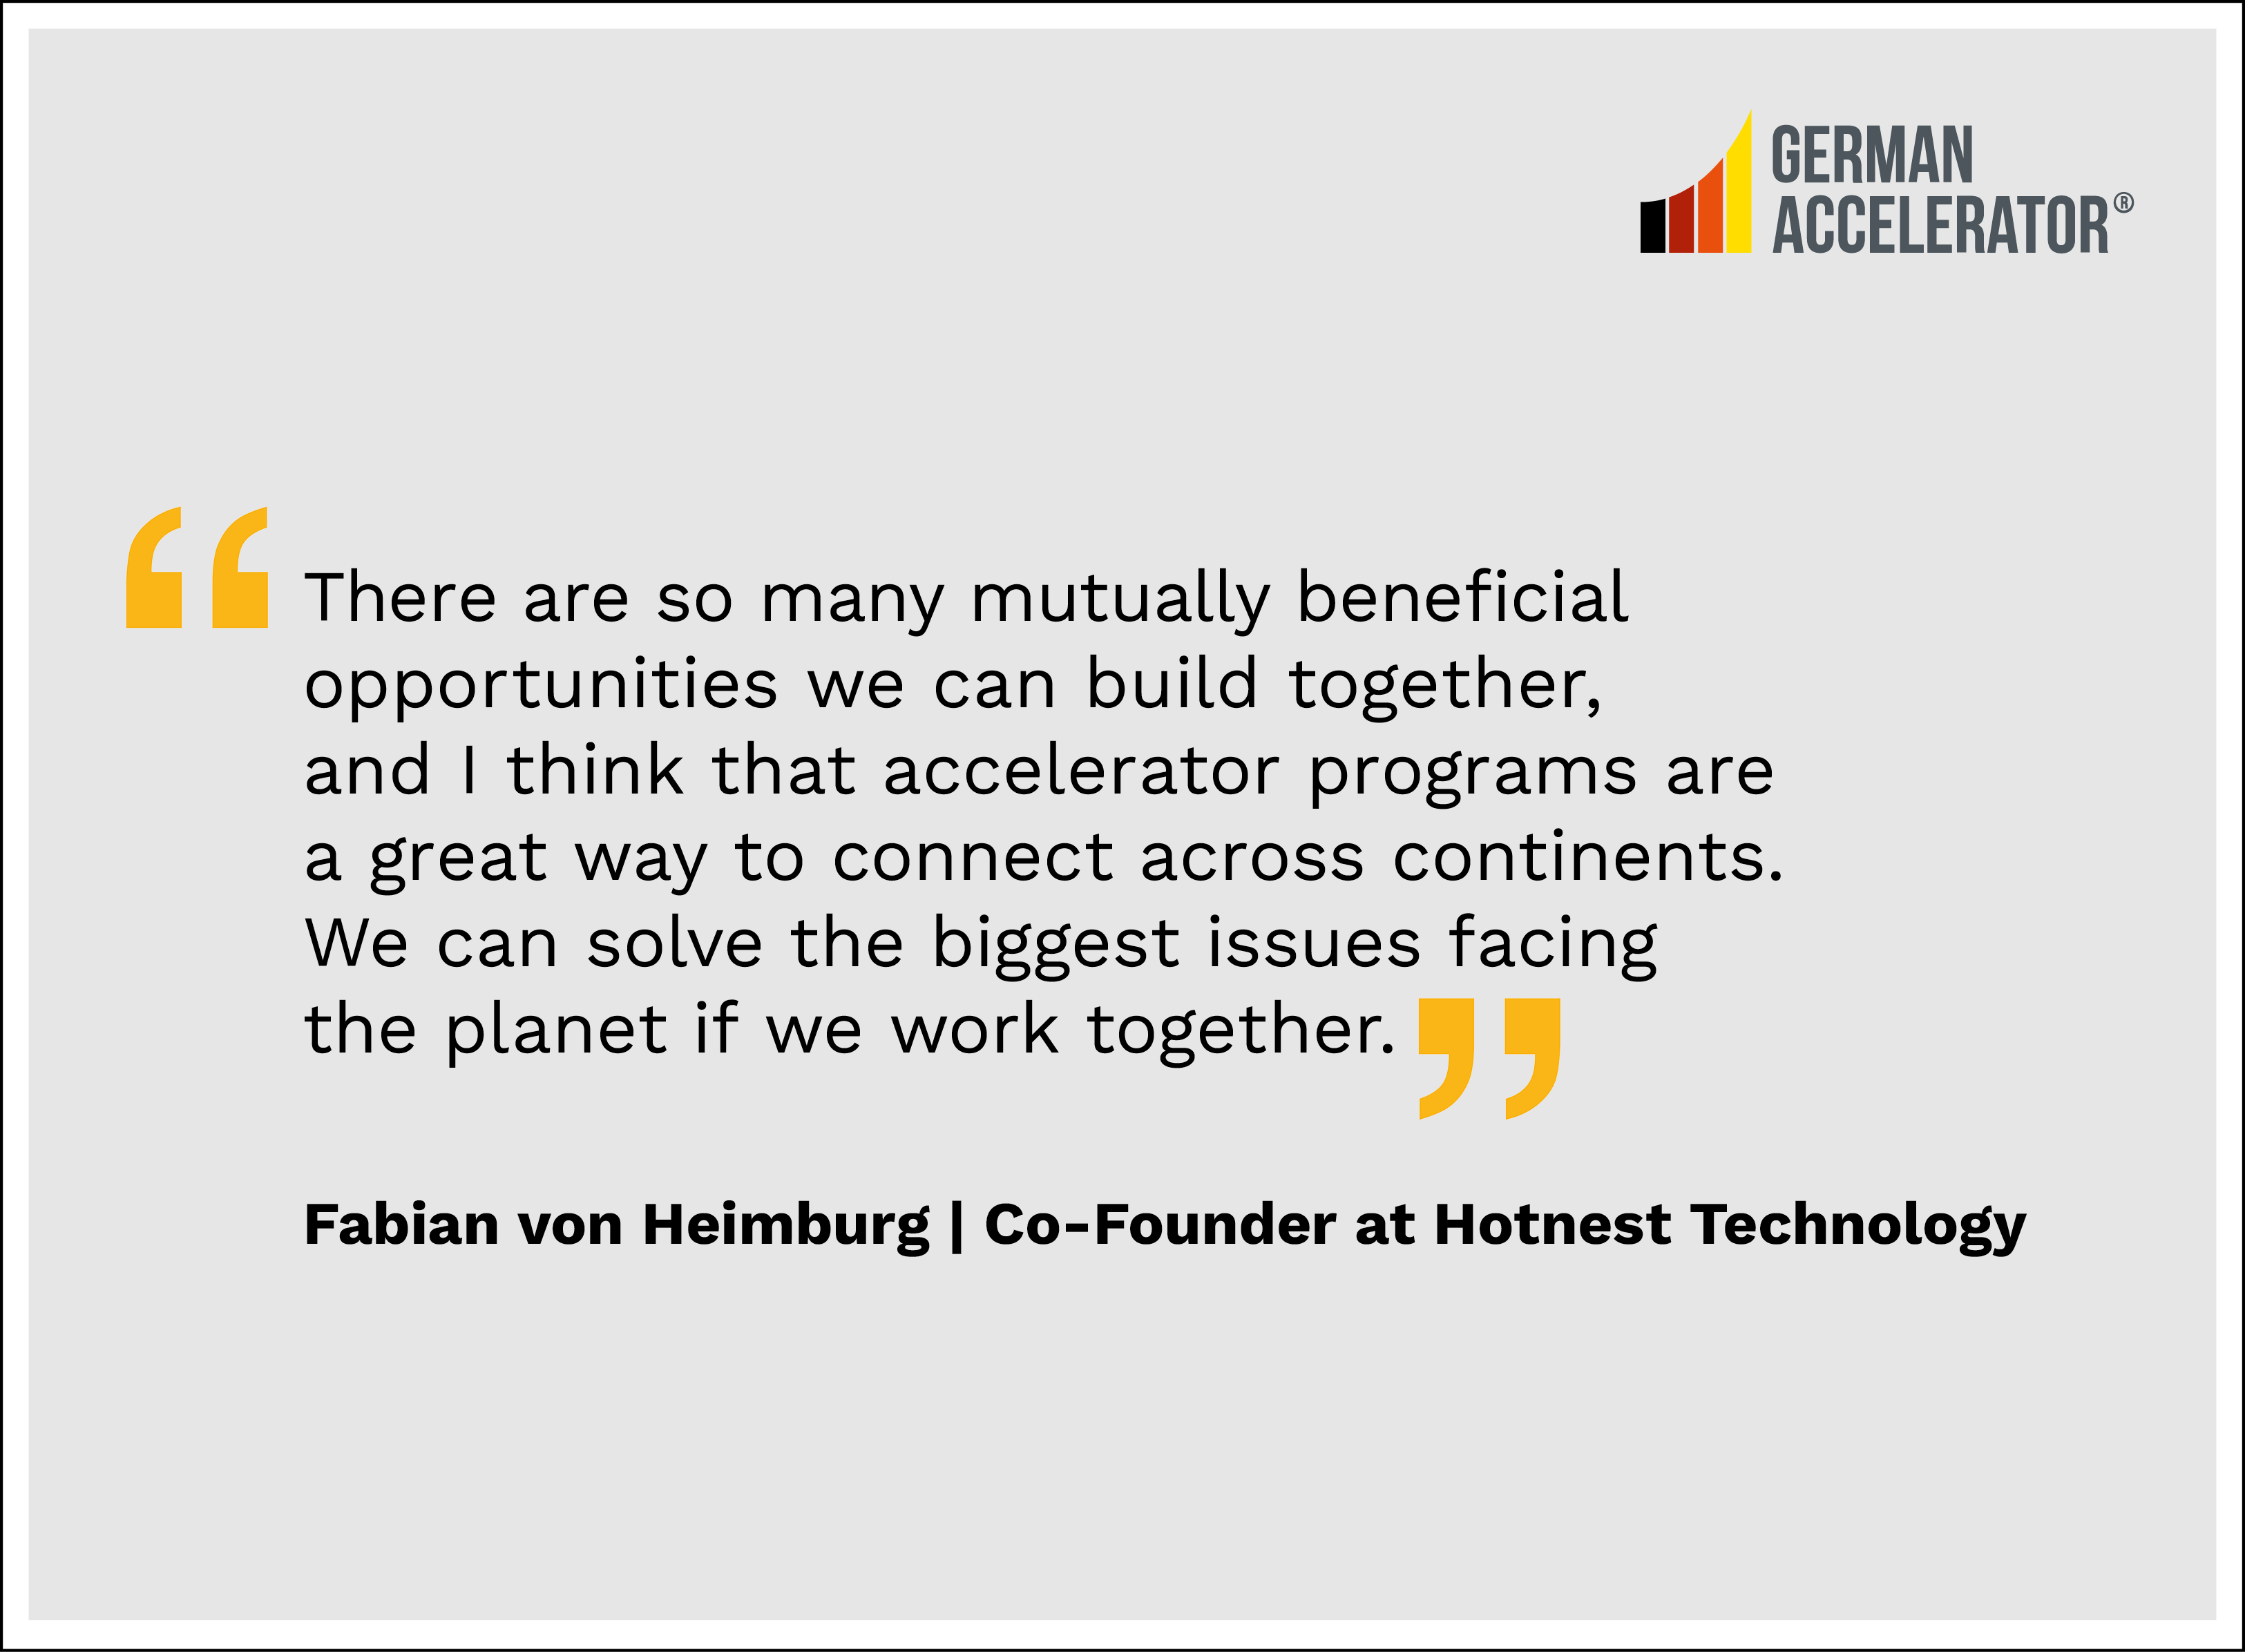 Learn how to scale your startup or company in the Chinese market in this interview with Fabian von Heimburg